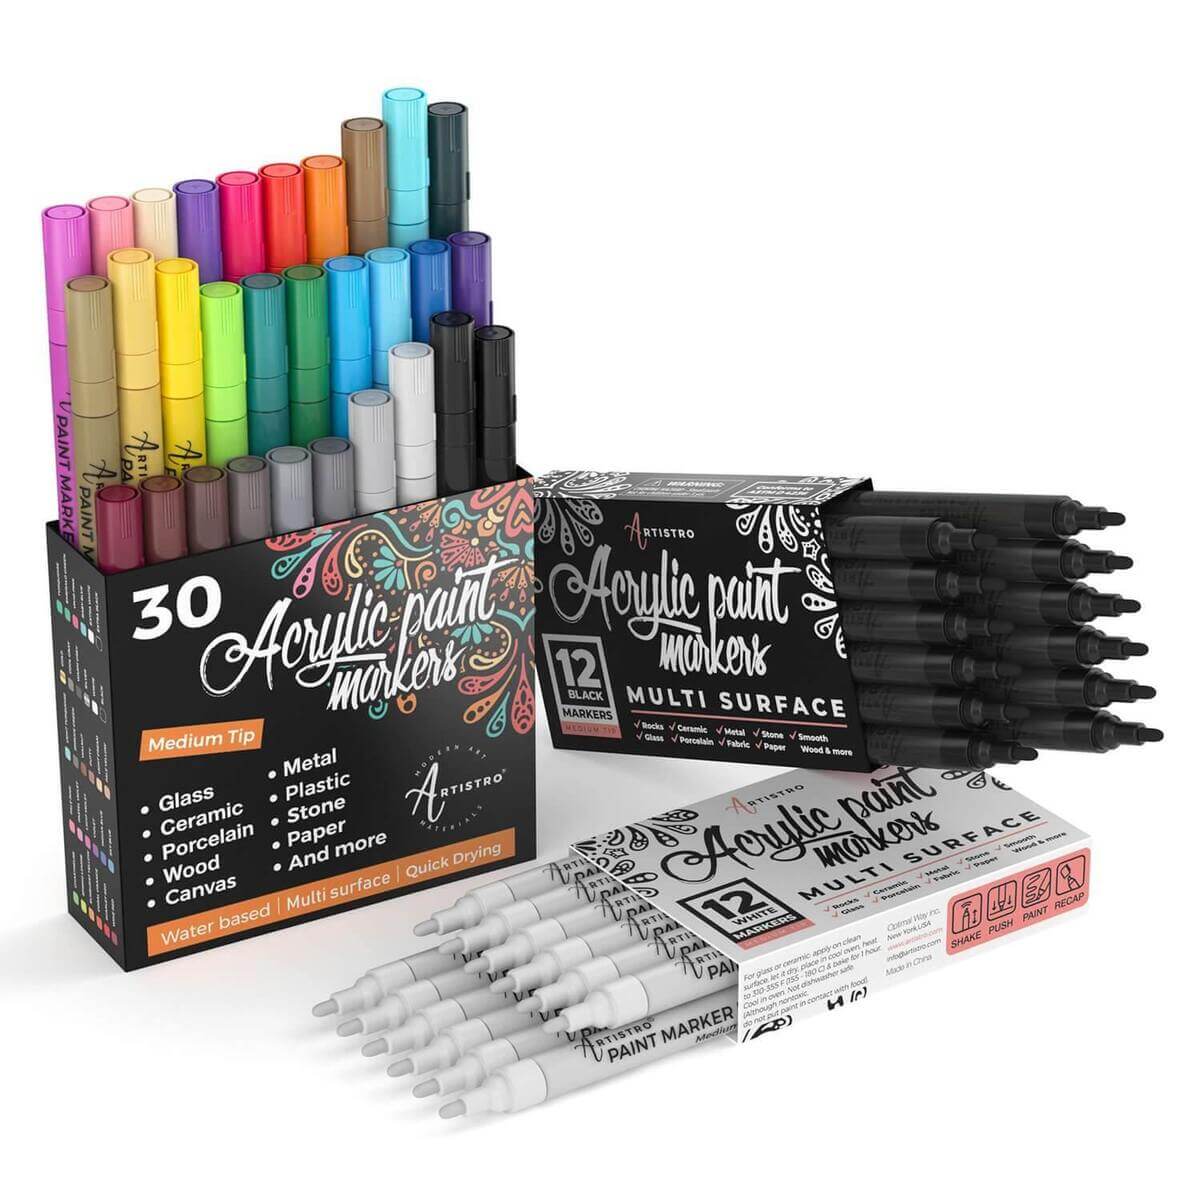 57 Artistro Paint Pens 42 Acrylic Extra Fine Tip Markers 15 Oil